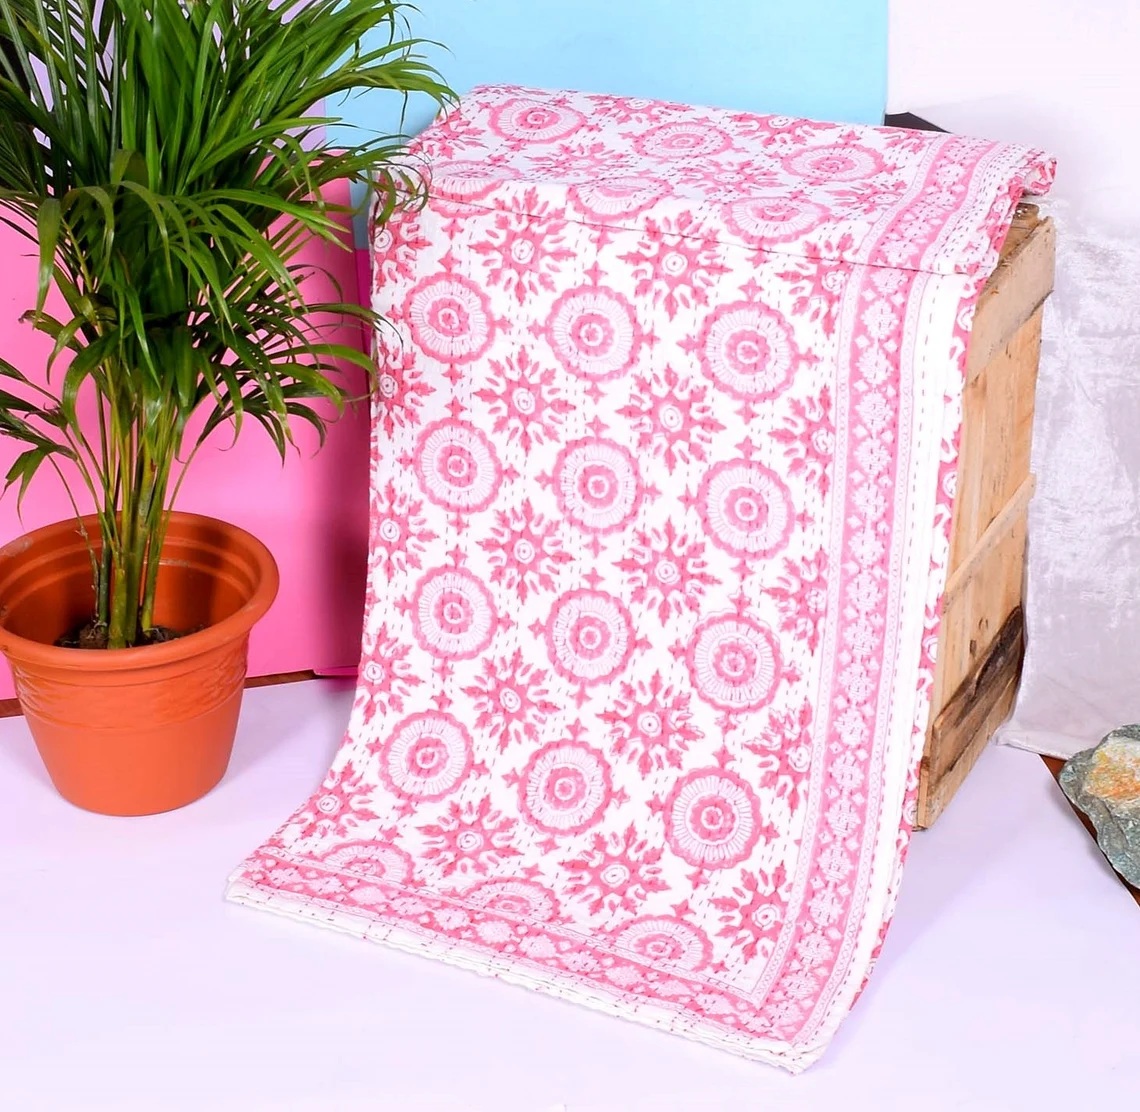 Details about   Cotton Kantha Quilt Hand Block Floral Print Bed Pink Throw Indian Queen Blanket 